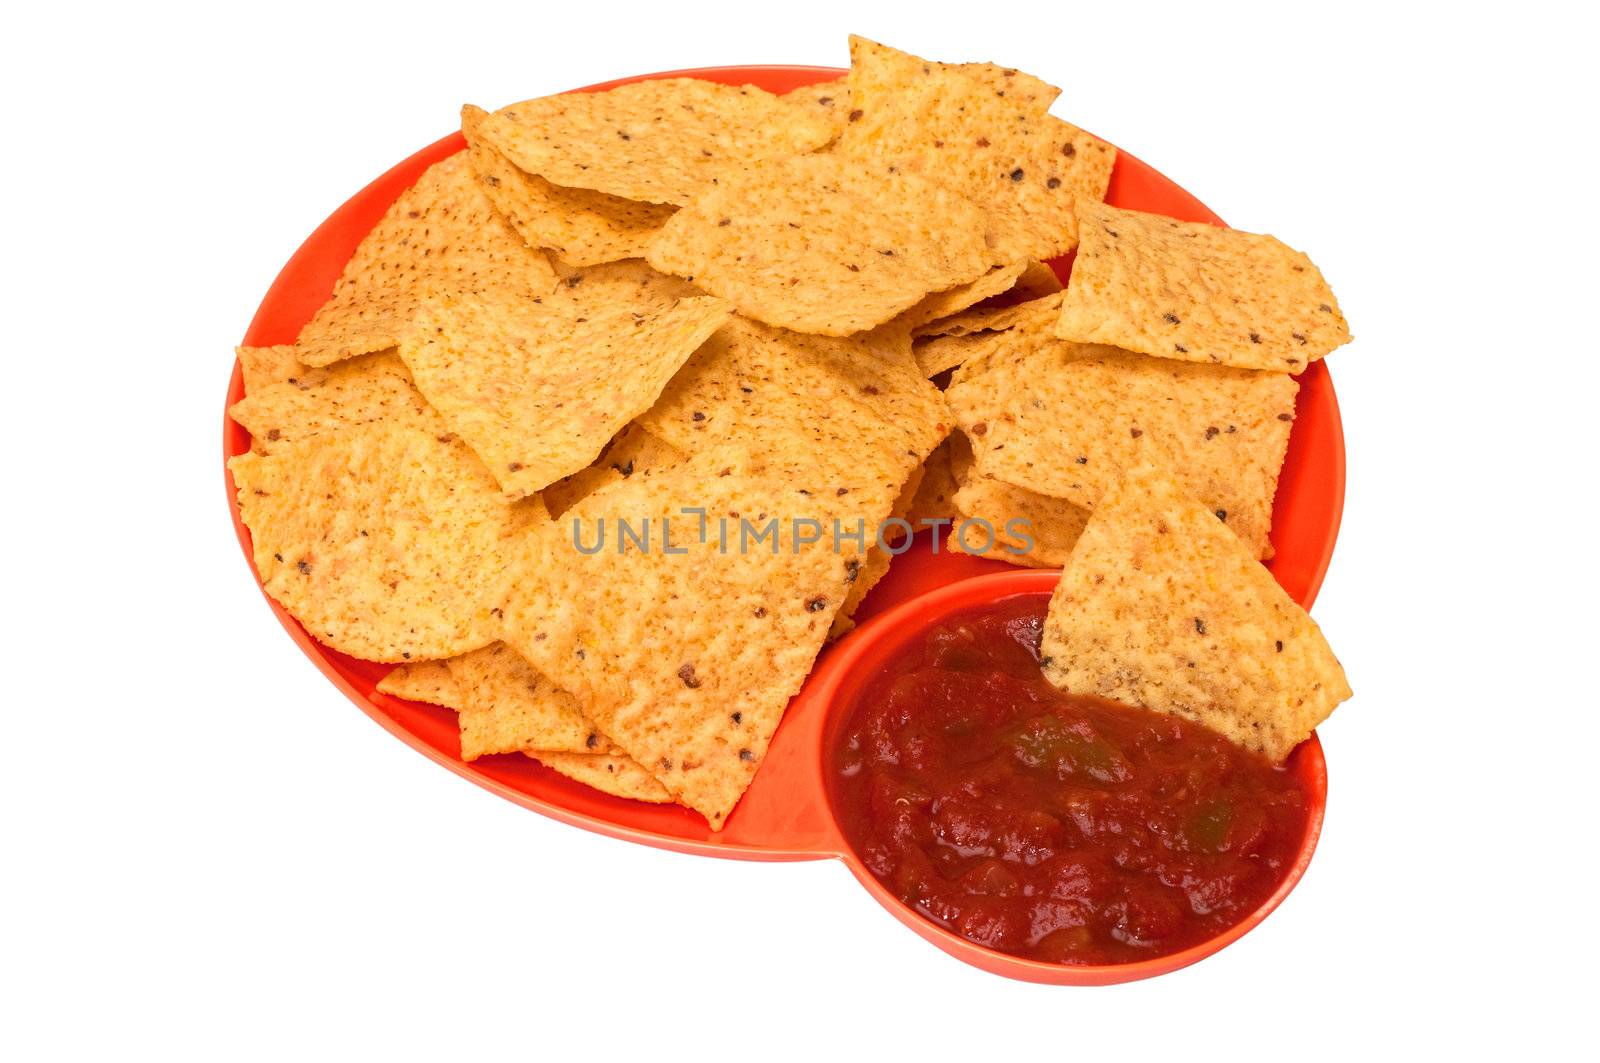 Tortilla chips and salsa on plate isolated on white background with clipping path.